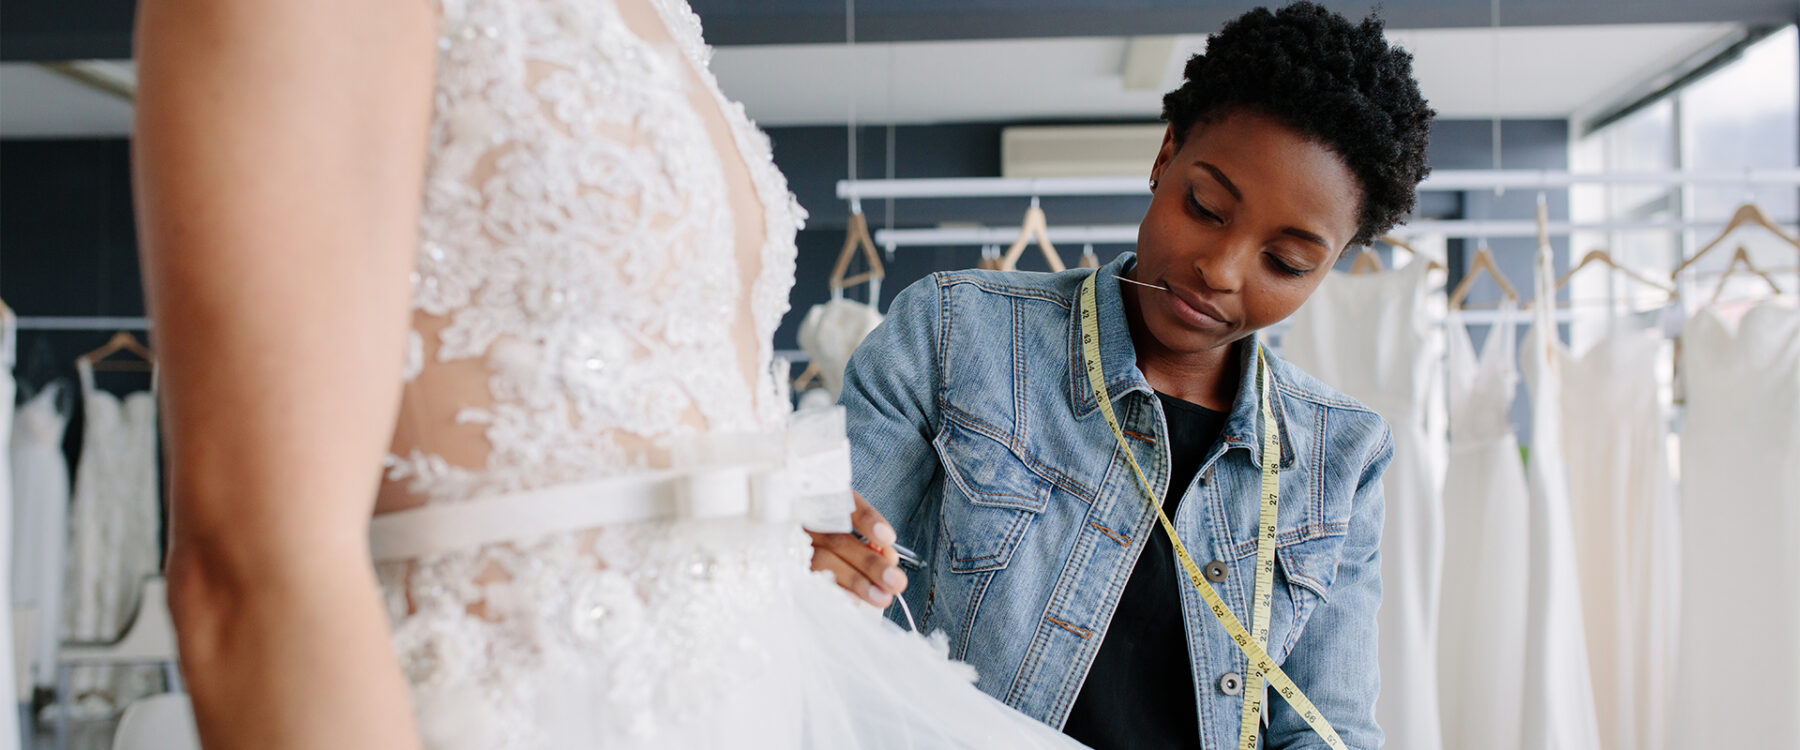 Guide: Wedding Dress Alterations (What to Do & When) | Nearly Newlywed ...